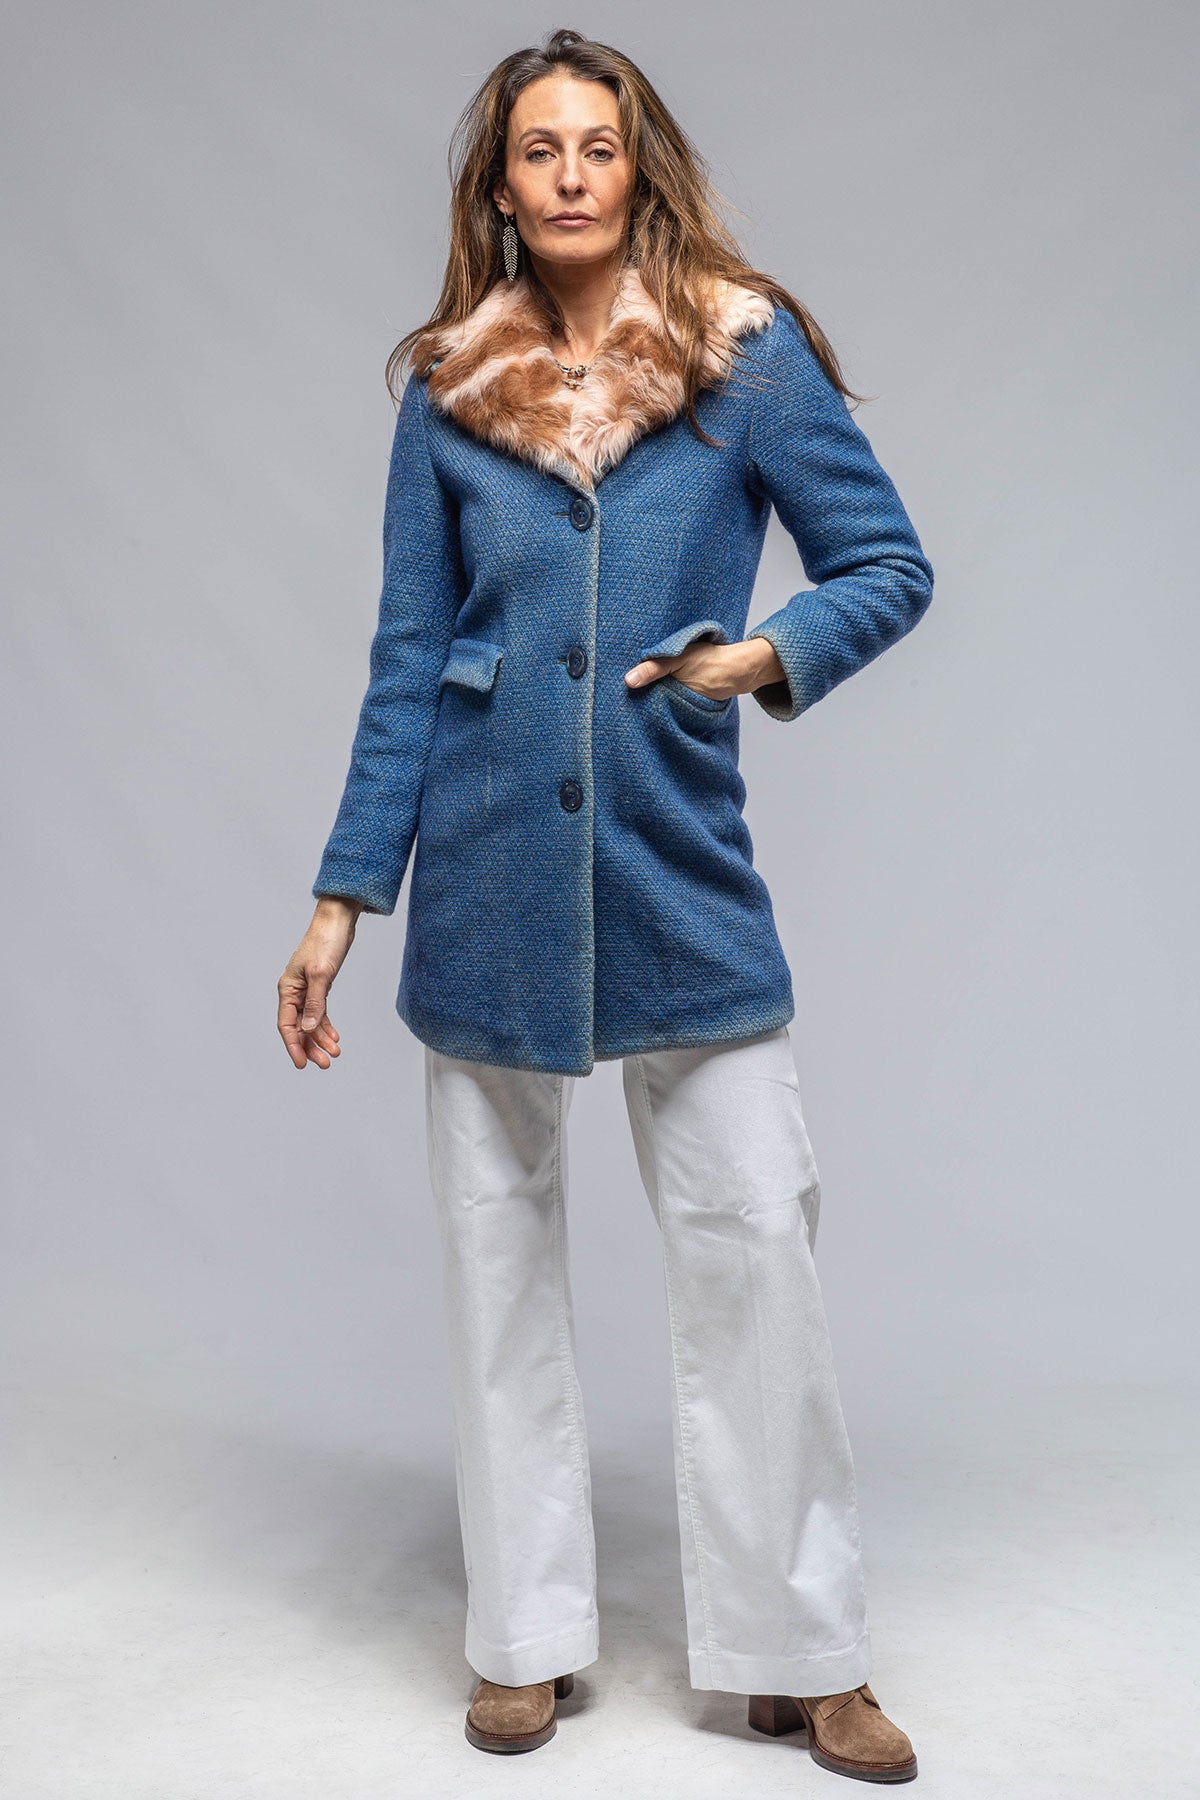 Poppy Long Garment Dyed Coat | Warehouse - Ladies - Outerwear - Cloth | Gimo's